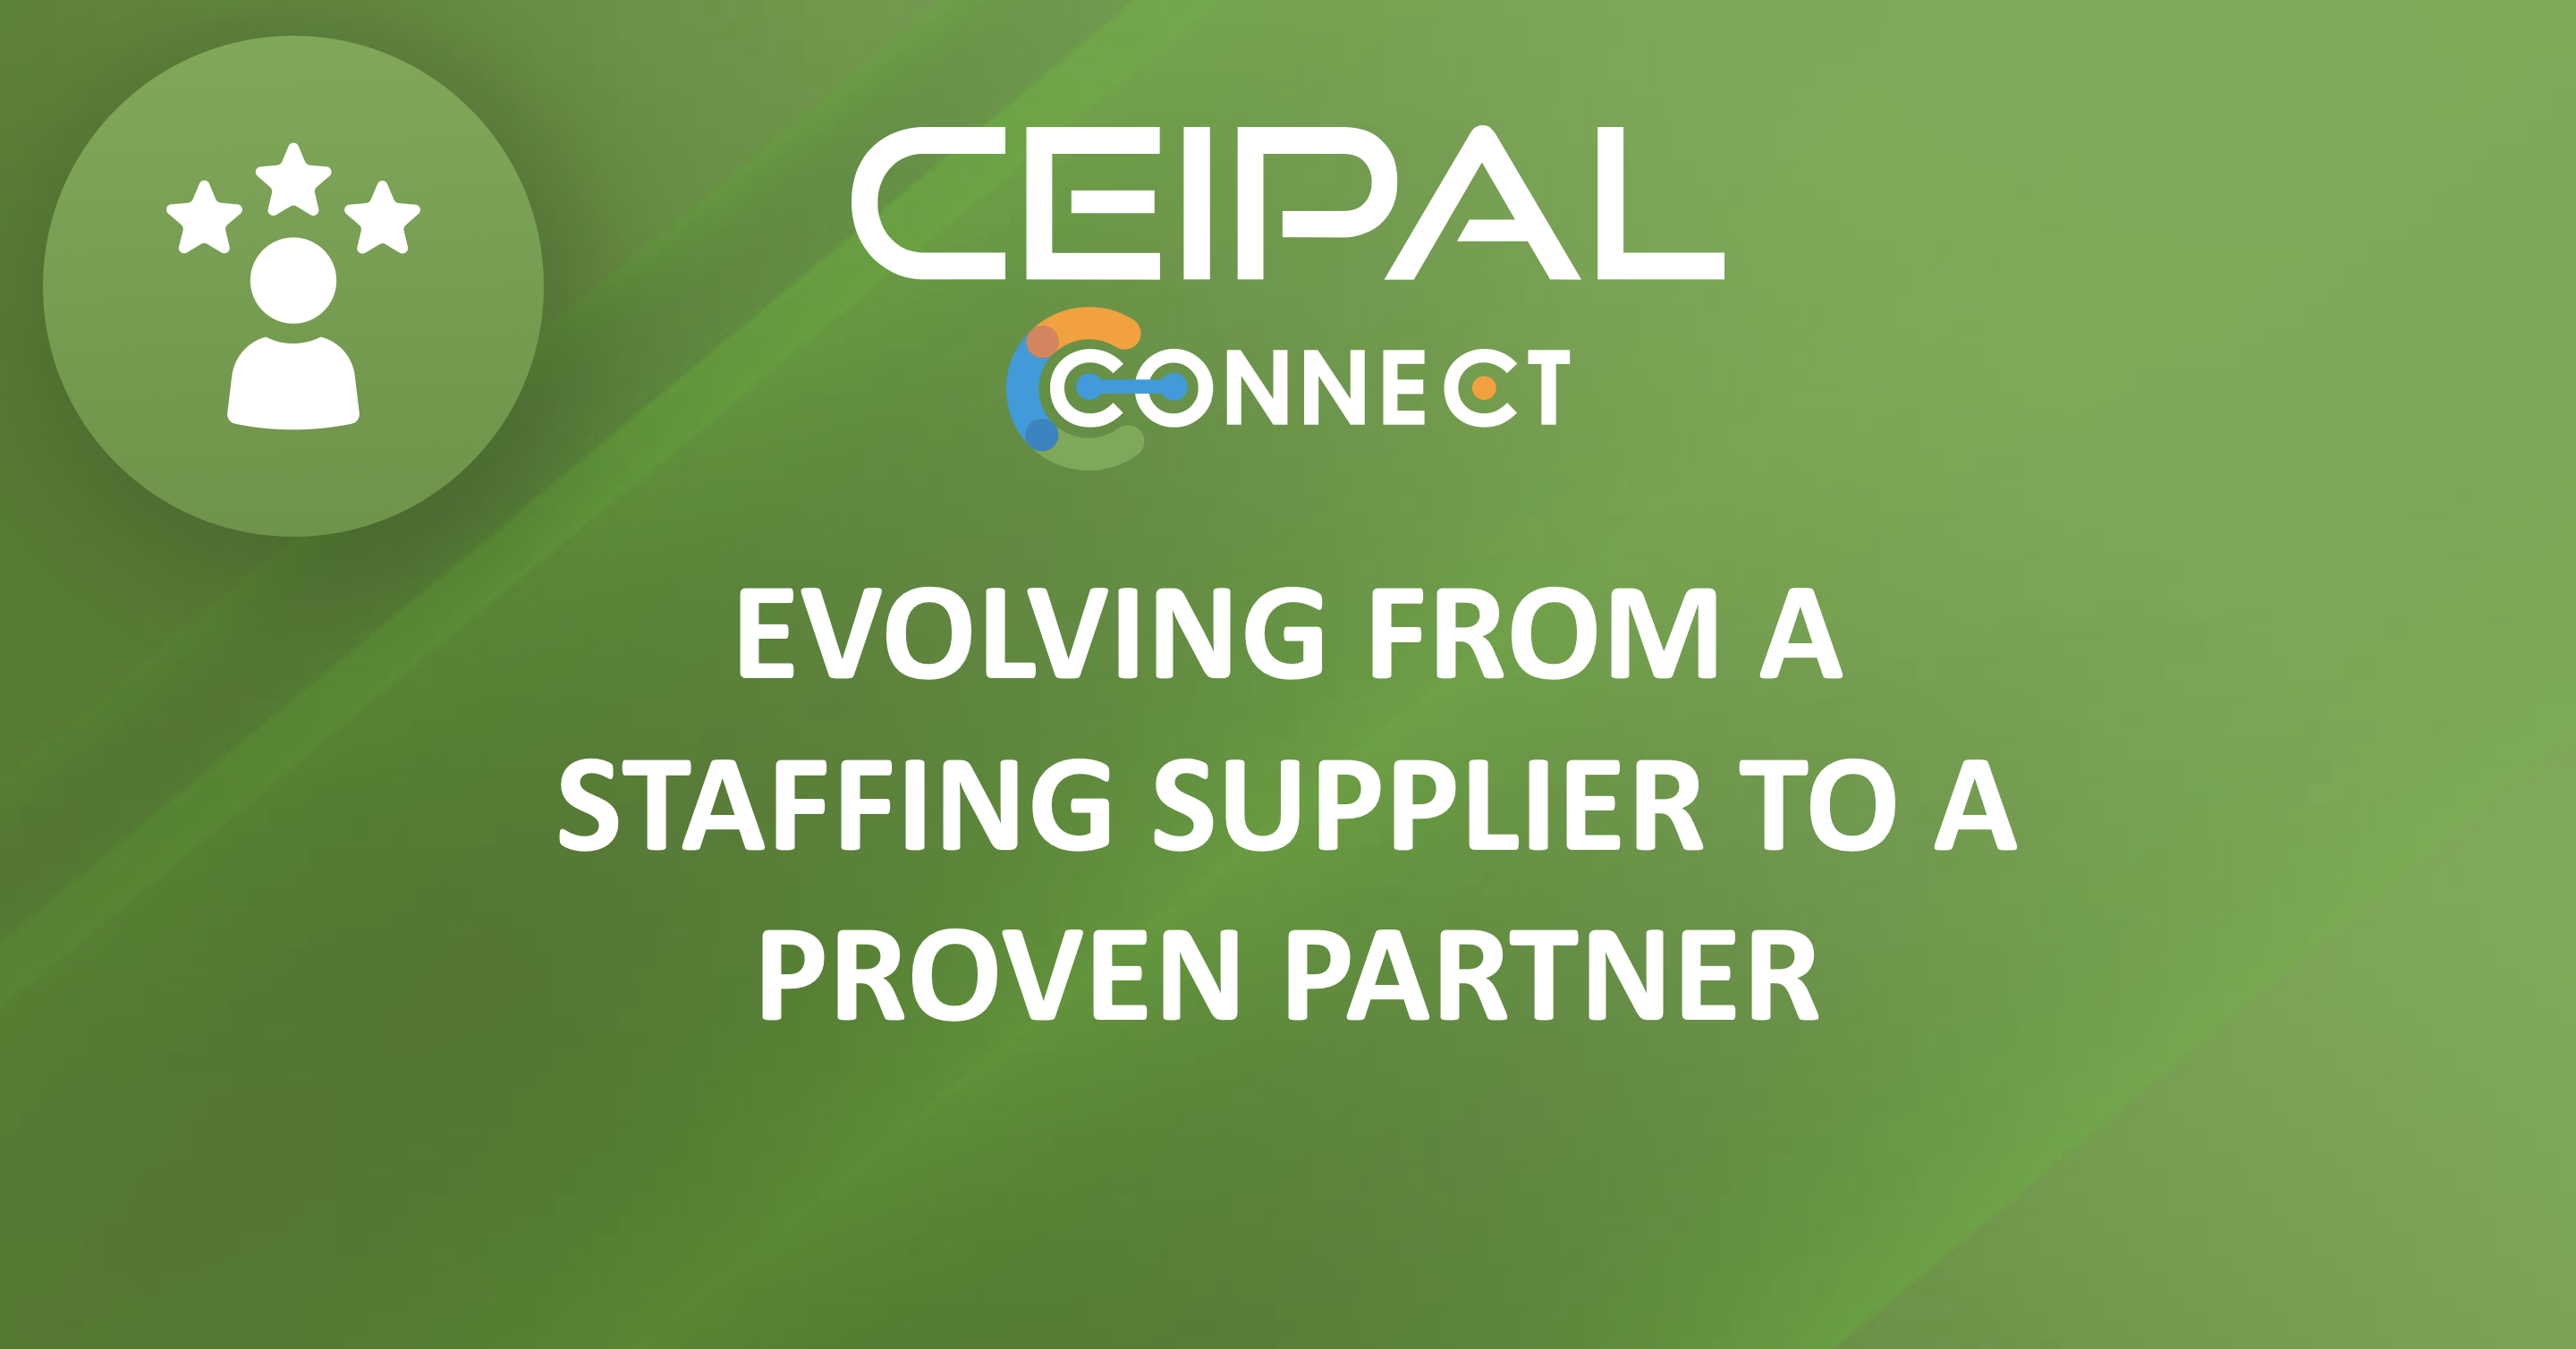 Evolving from a Staffing Supplier to a Proven Partner – stories of operational and service excellence